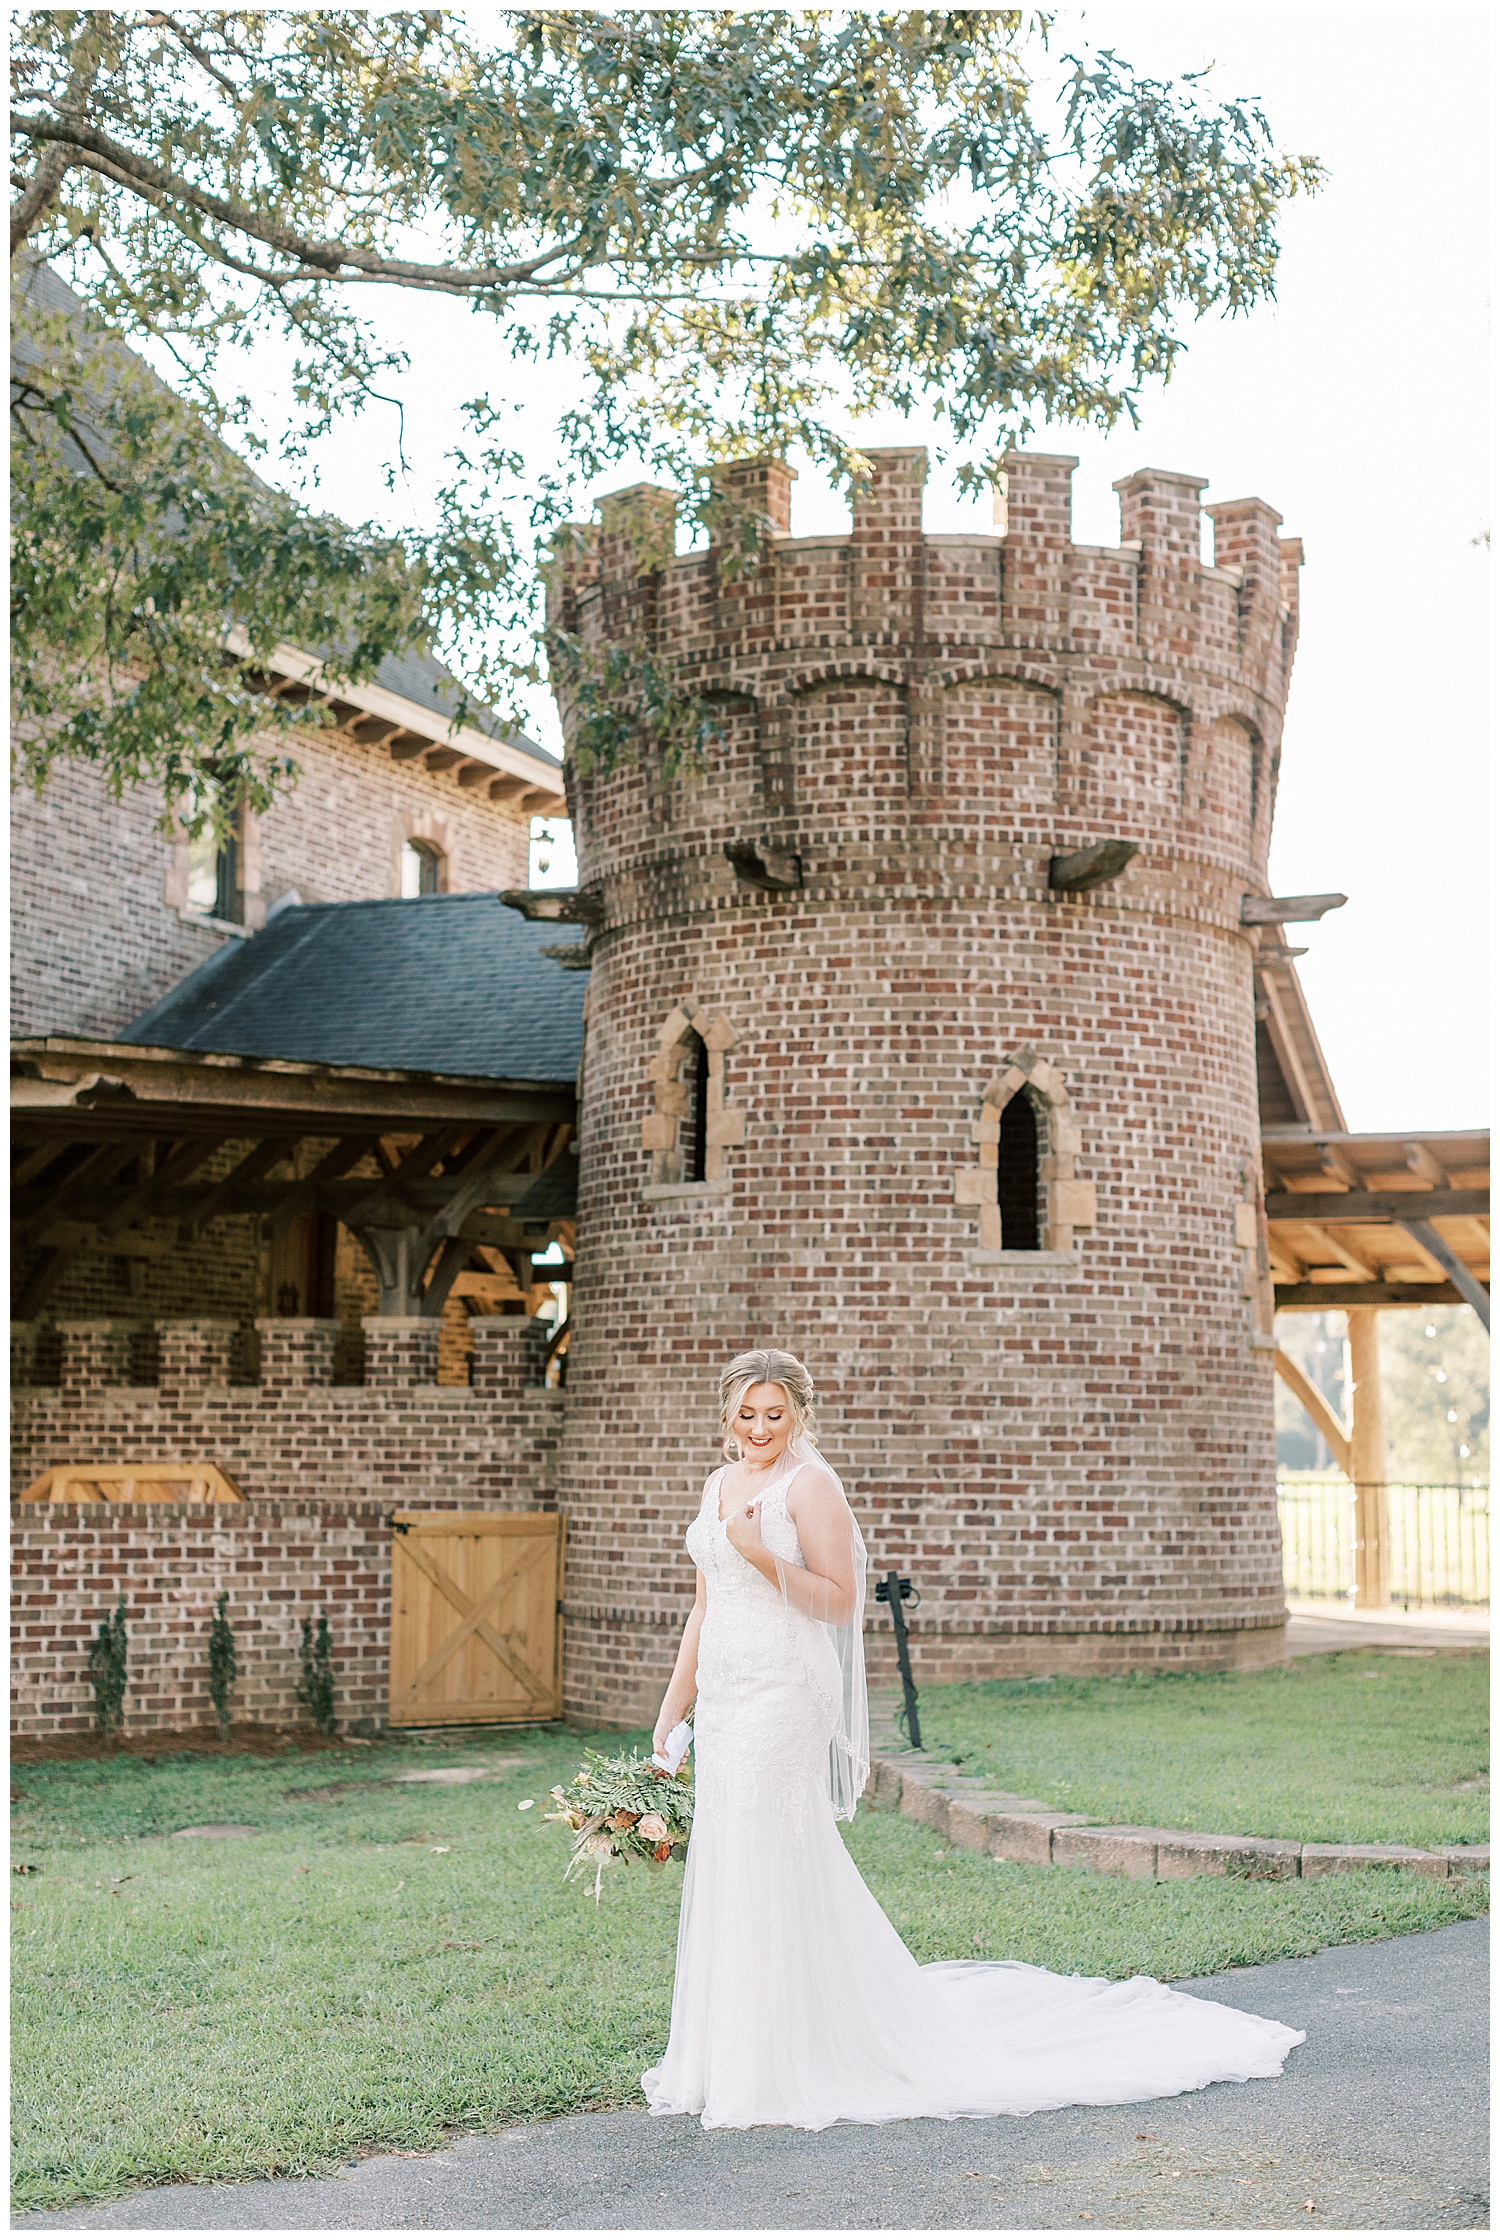 A bride stands in front of a turret.